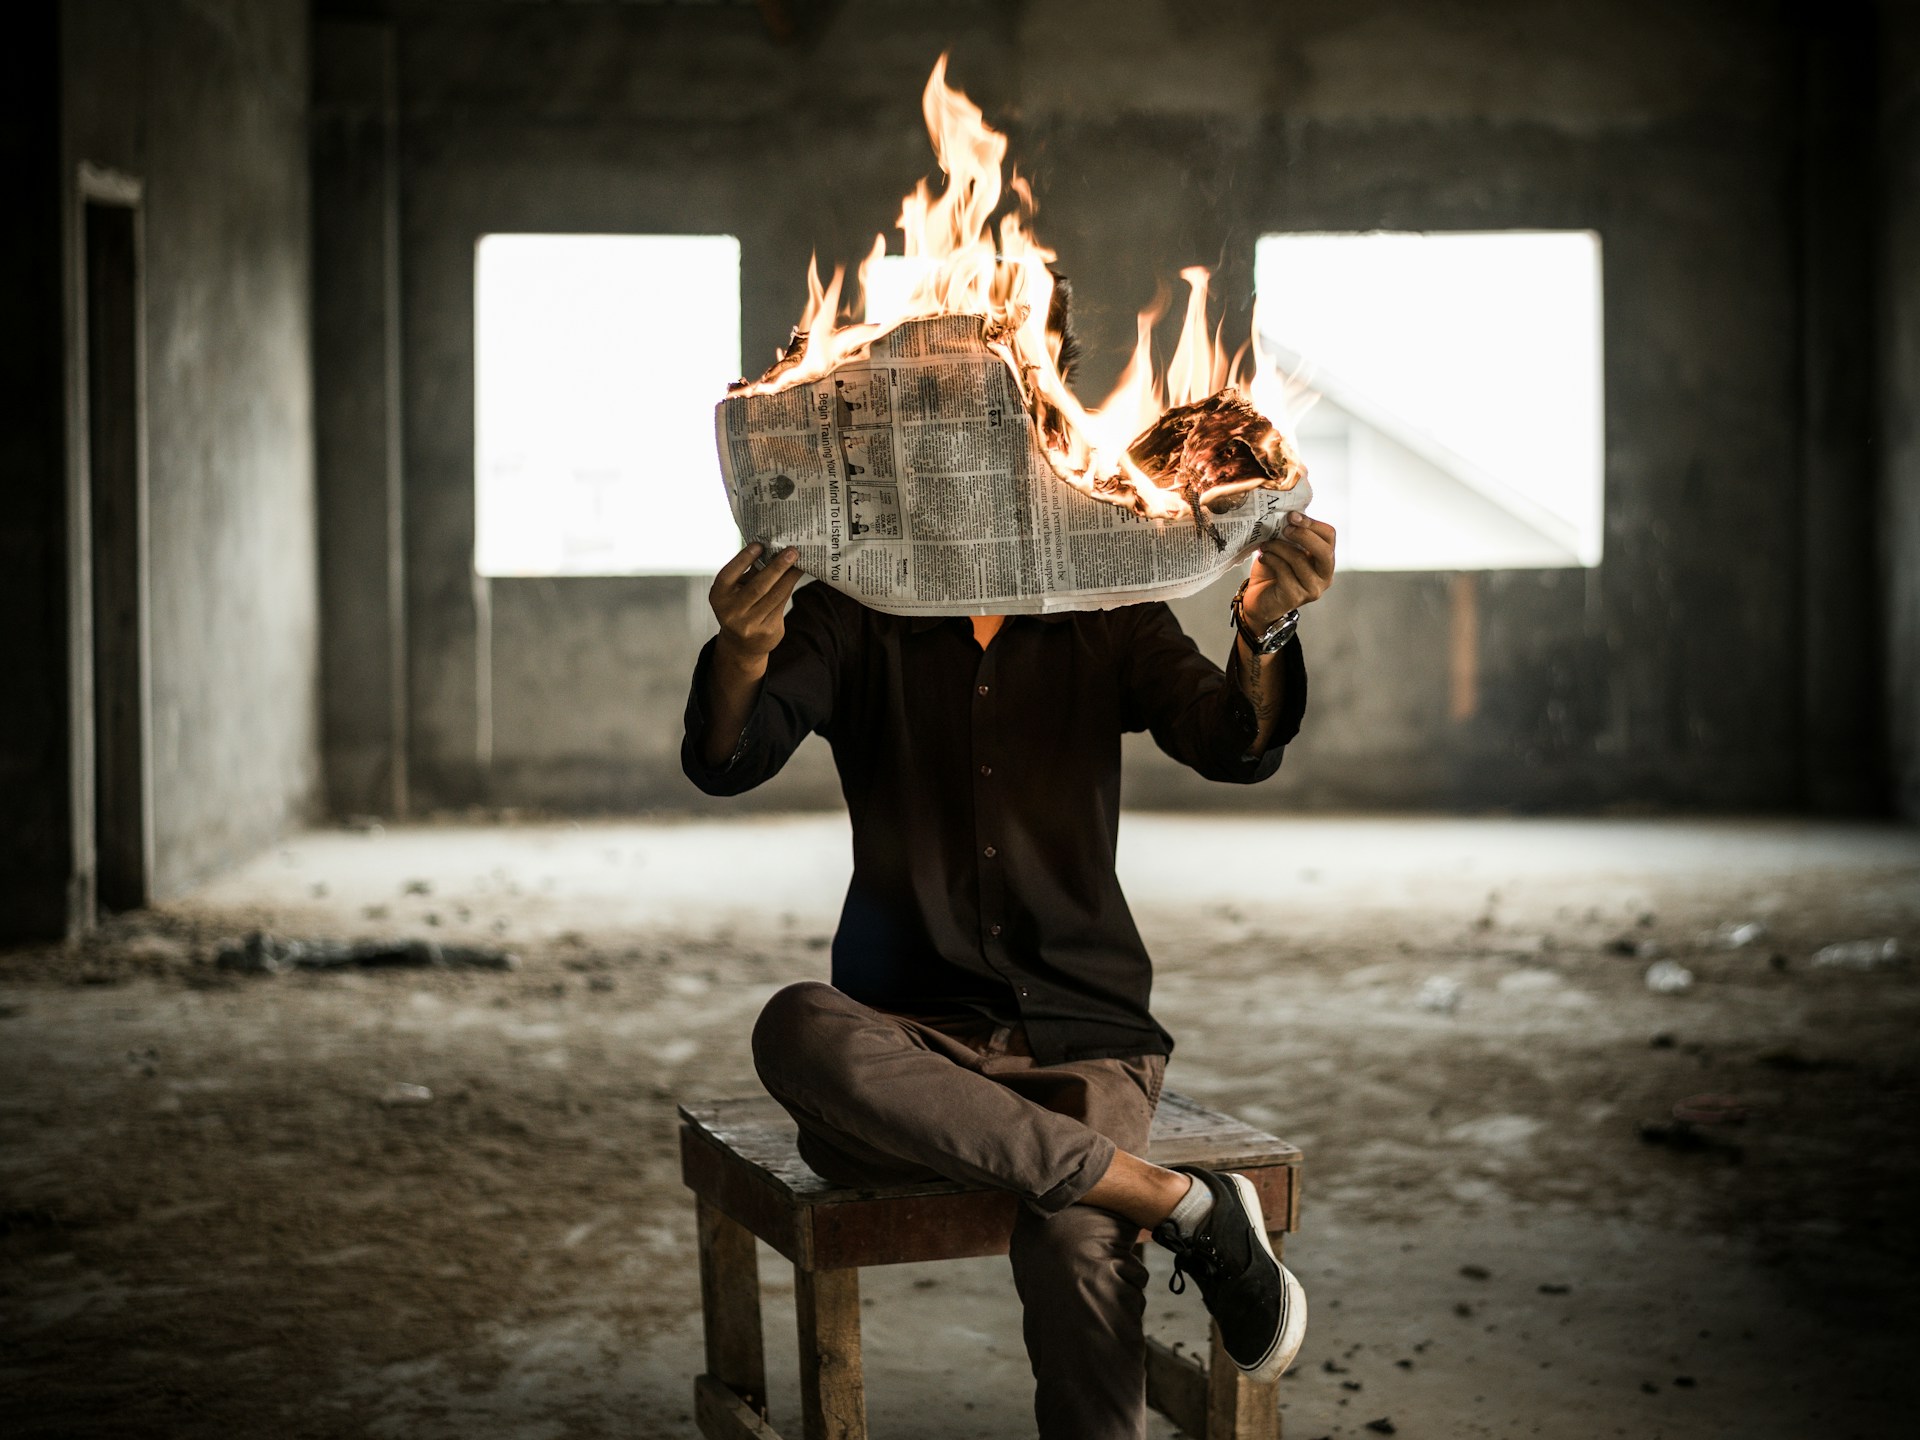 An image of a person, appearing to read a newspaper that is on fire.  They are sitting in an empty room.Photo by Nijwam Swargiary on Unsplash